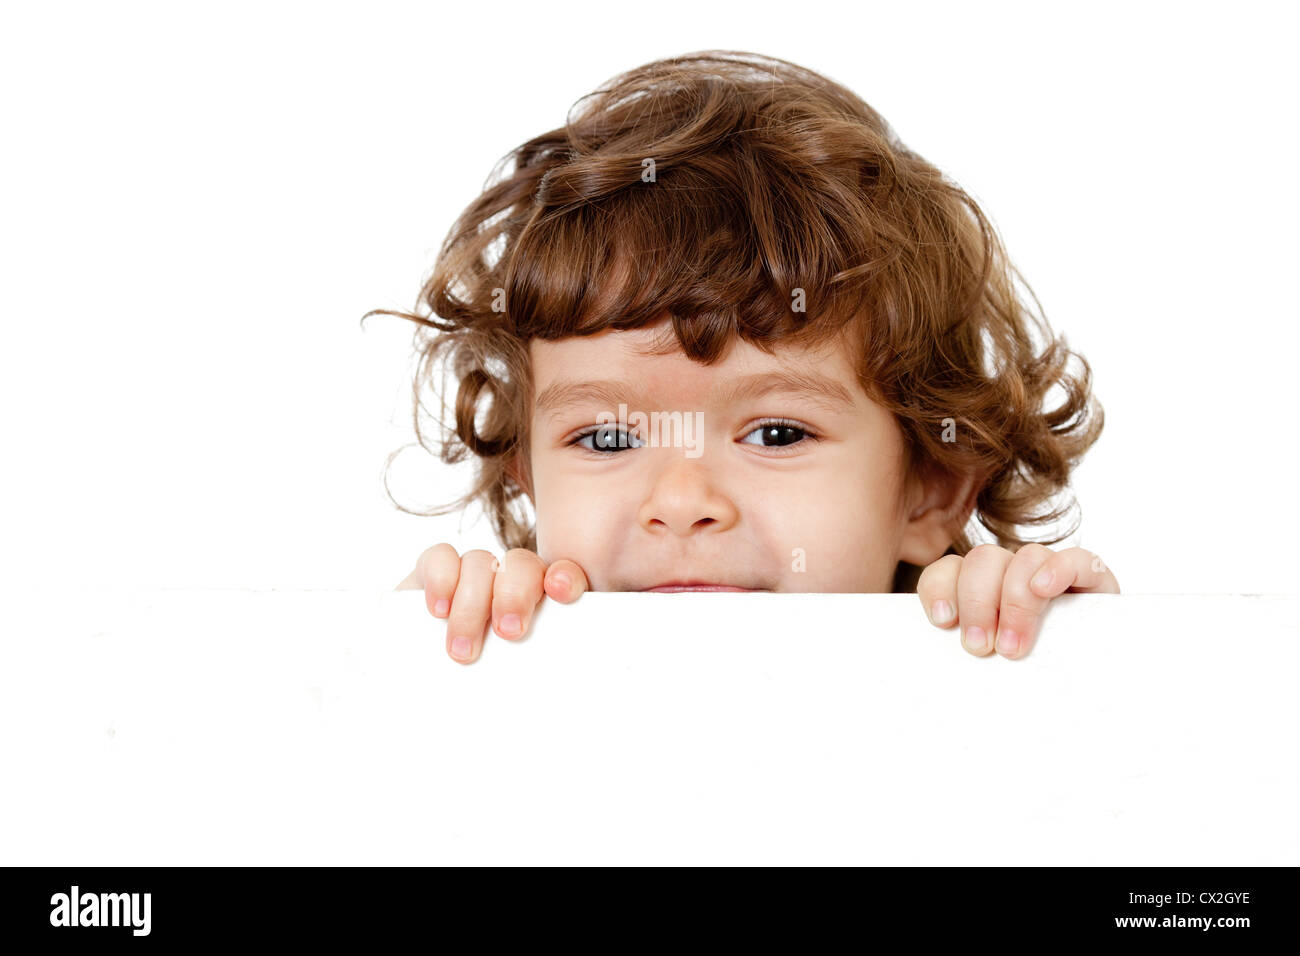 Curly funny child face holding blank advertising banner Stock Photo